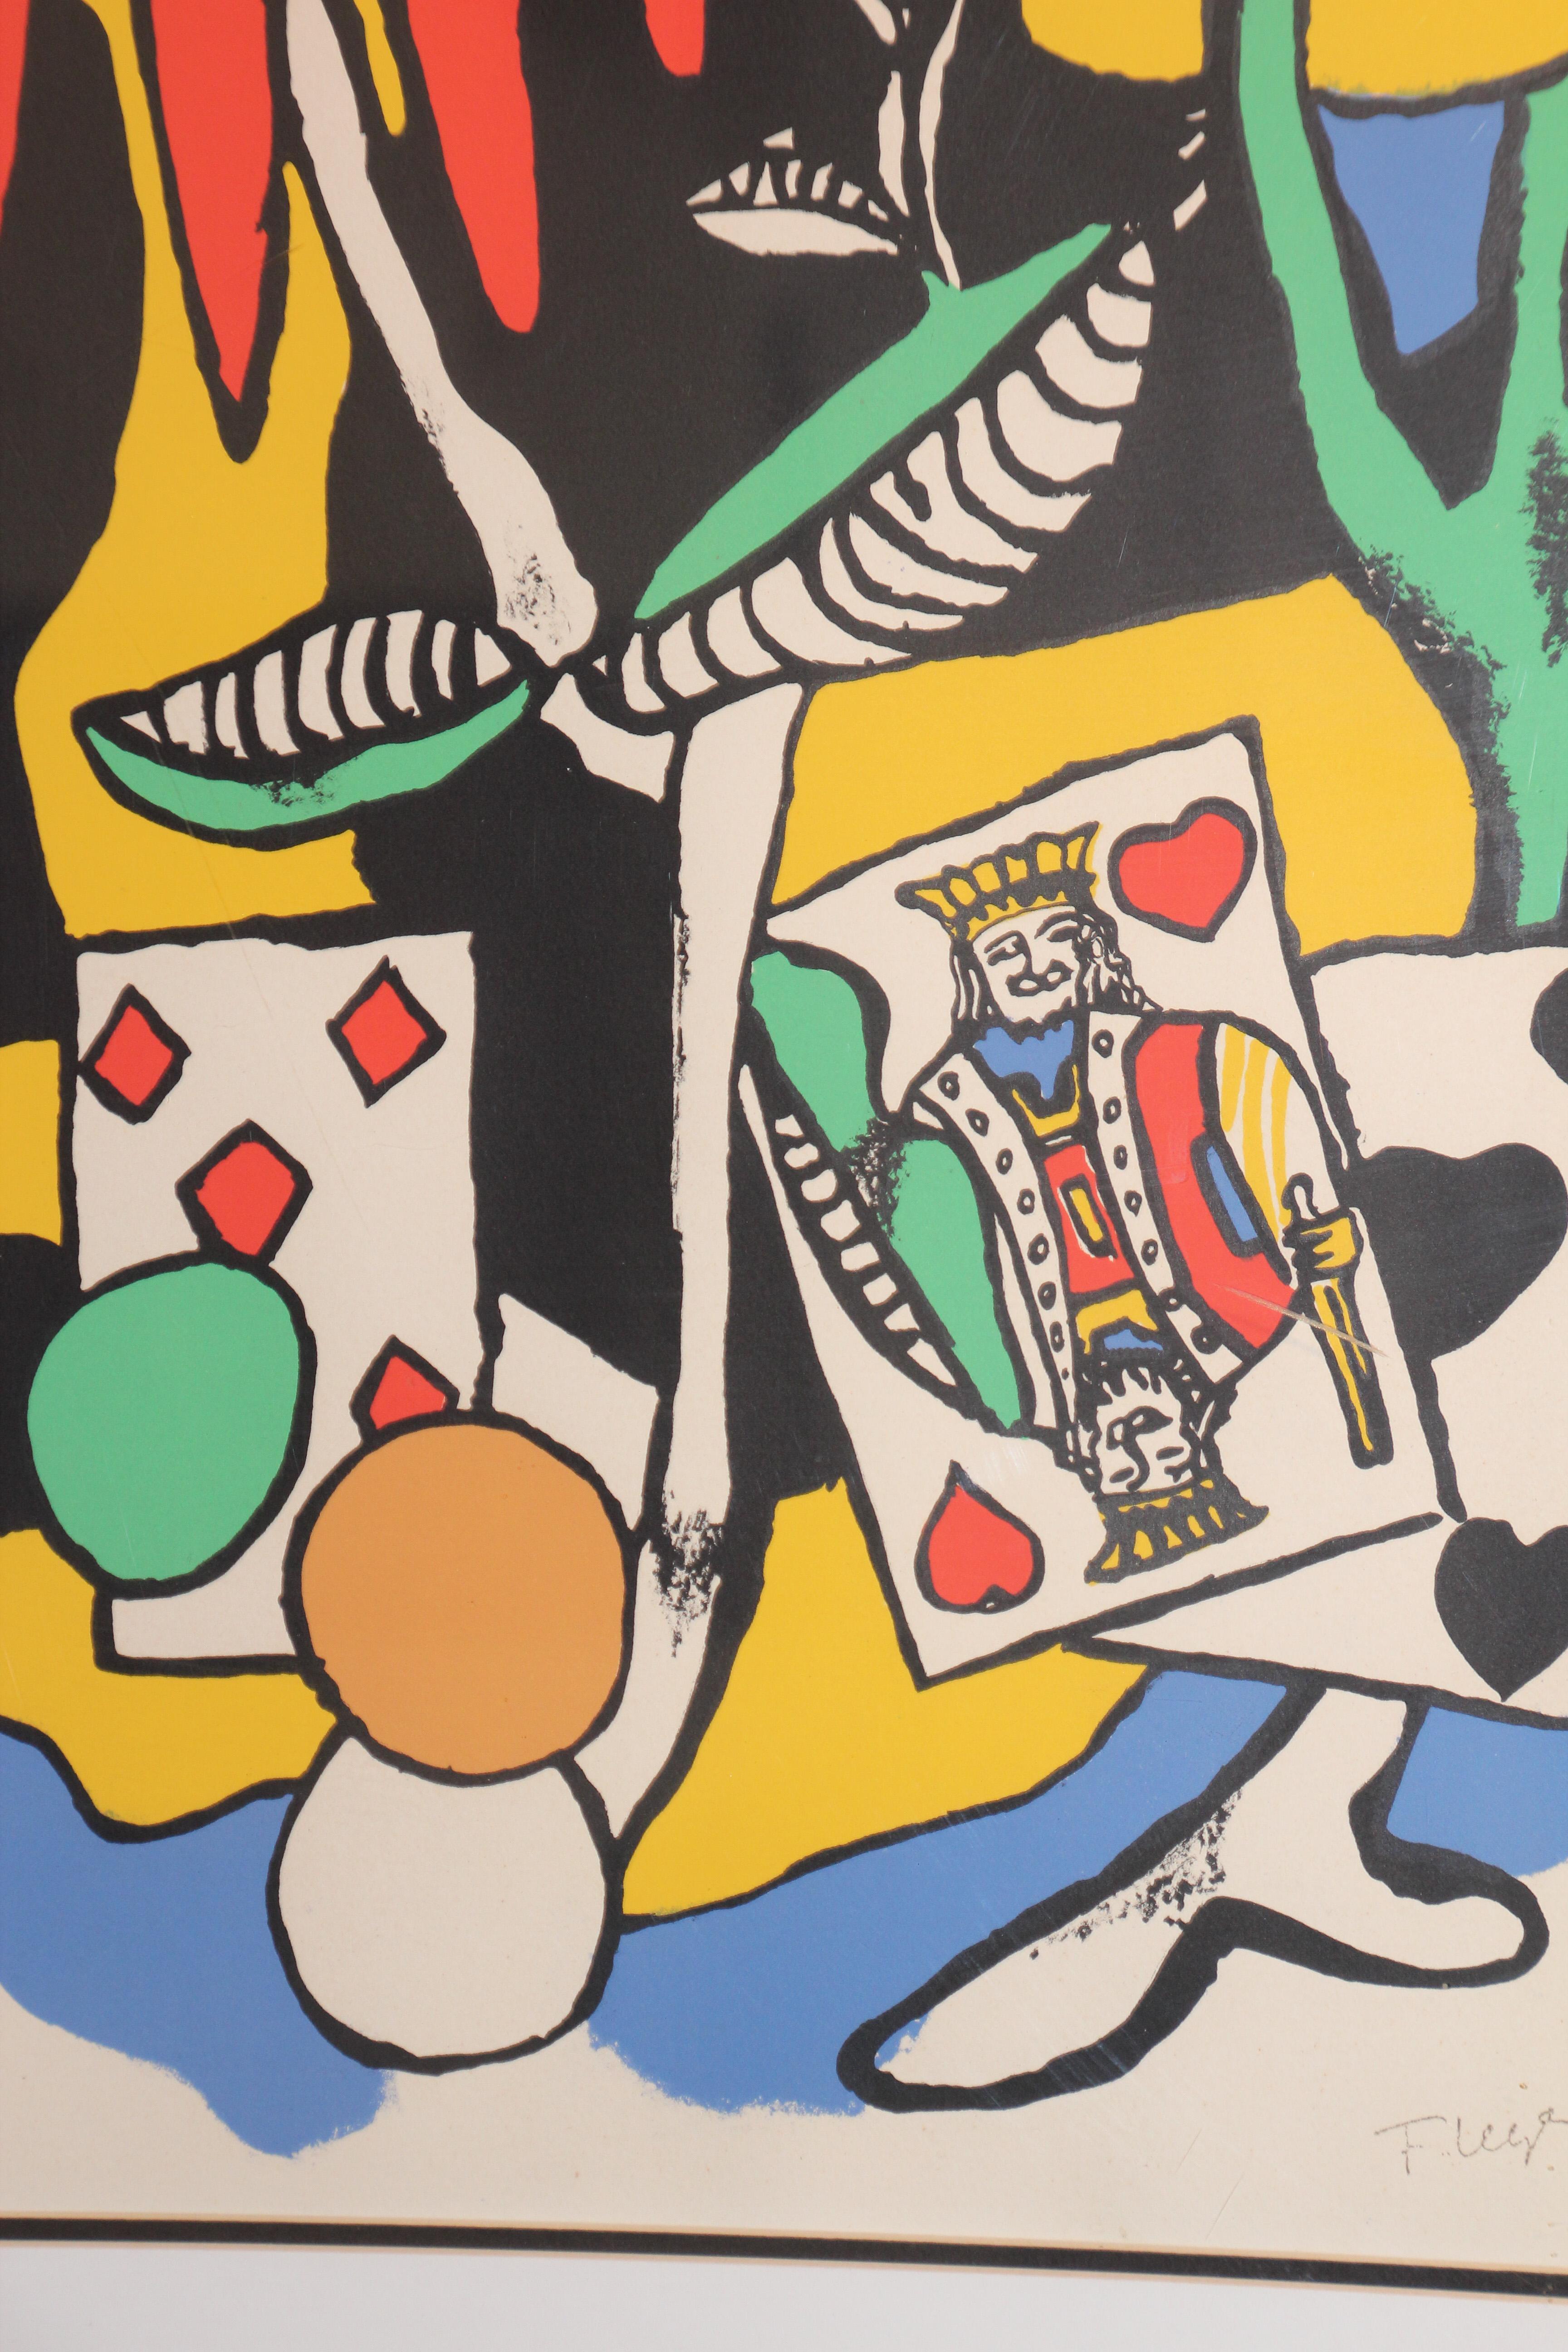 Paper Fernand Leger The King of Heart, Signed and Numbered 284/300 Lithograph